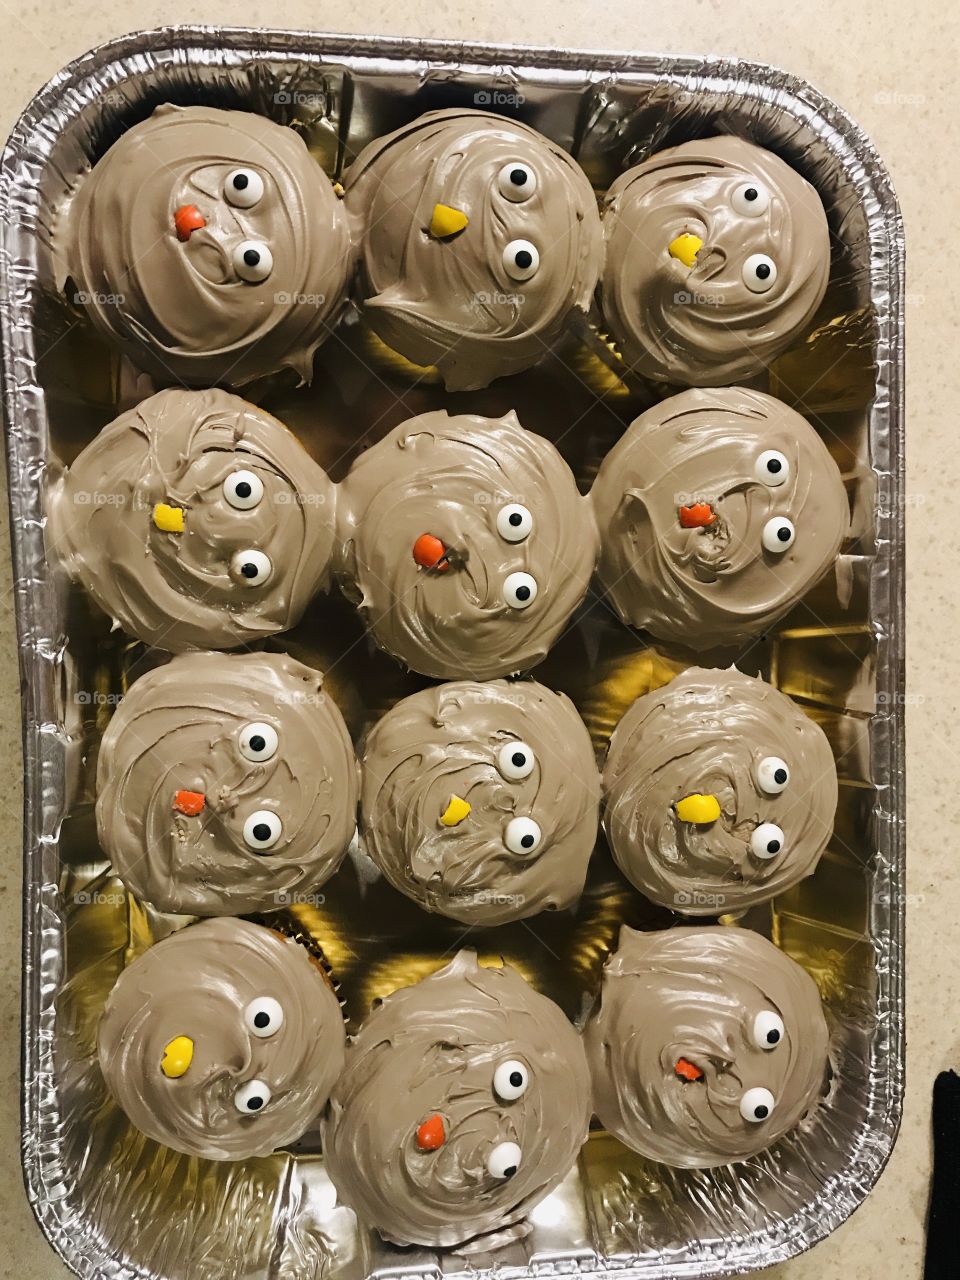 Thanksgiving cupcakes for my children’s party at school.